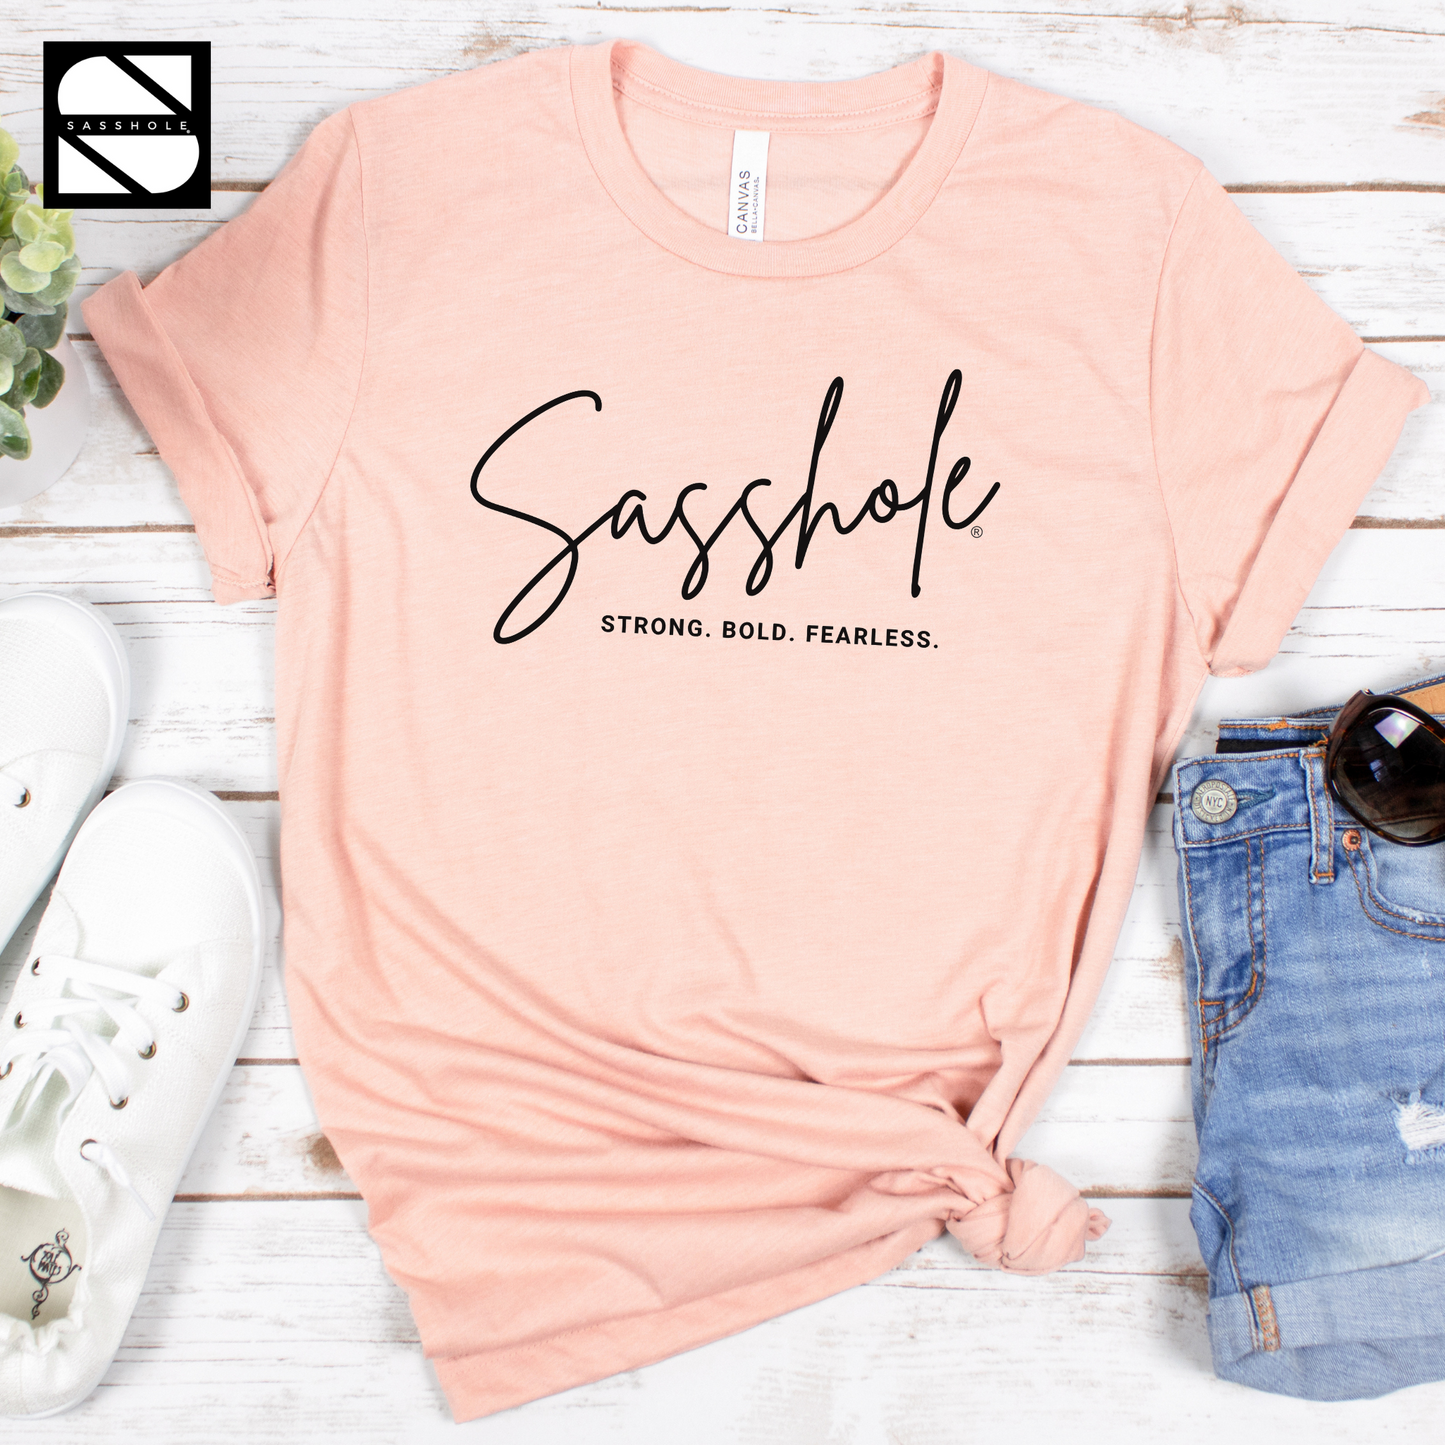 Make a Sassy Statement with Our Women's Sasshole® Stong. Bold. Fearless T-Shirt